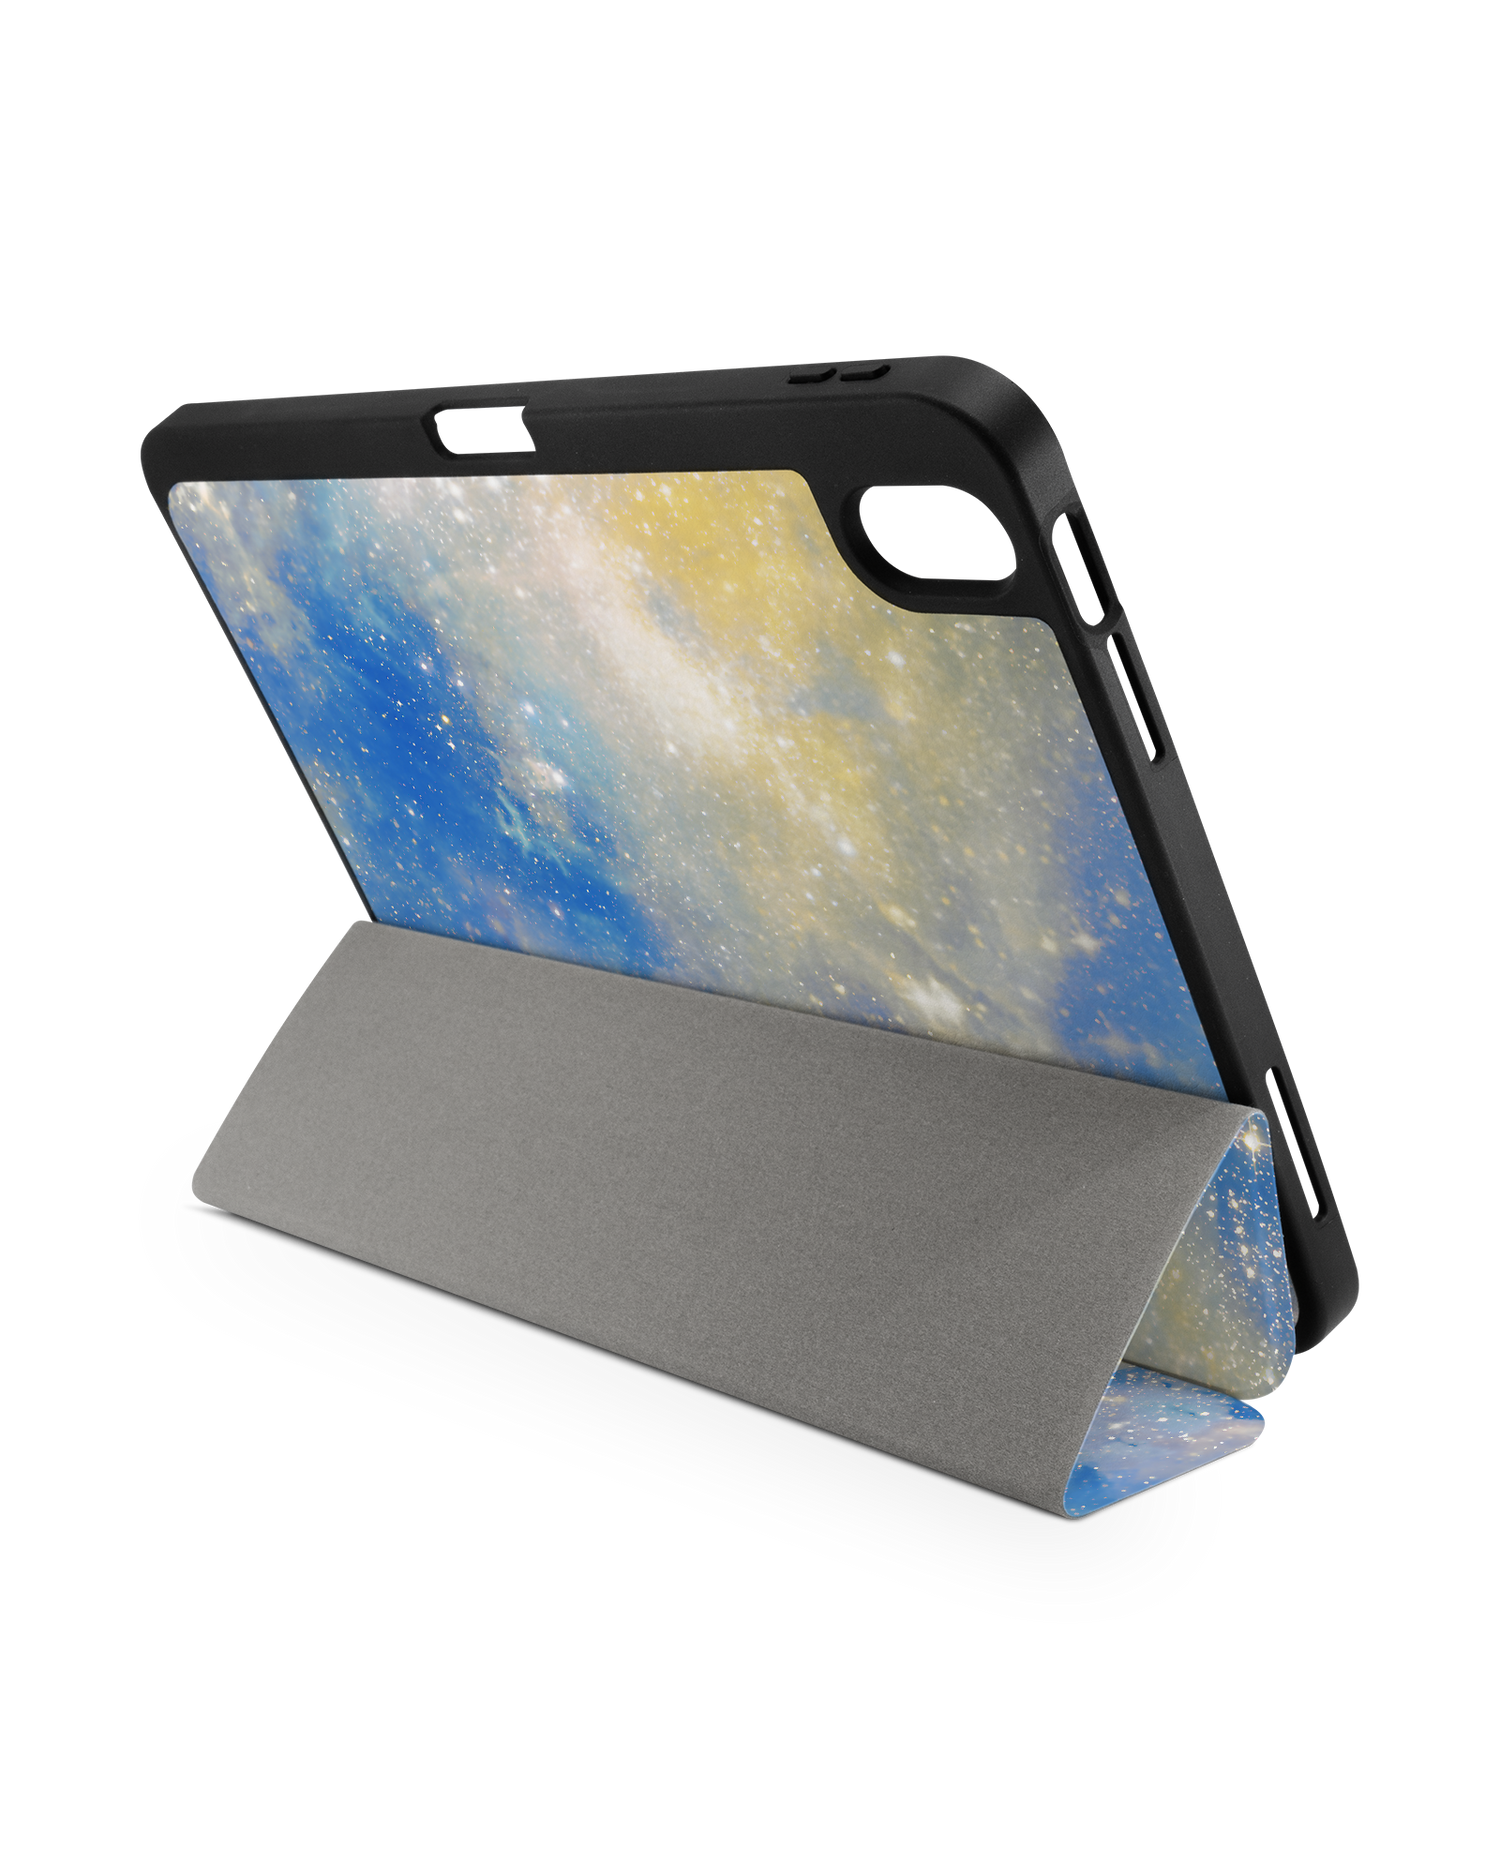 Spaced Out iPad Case with Pencil Holder for Apple iPad (10th Generation): Set up in landscape format (back view)